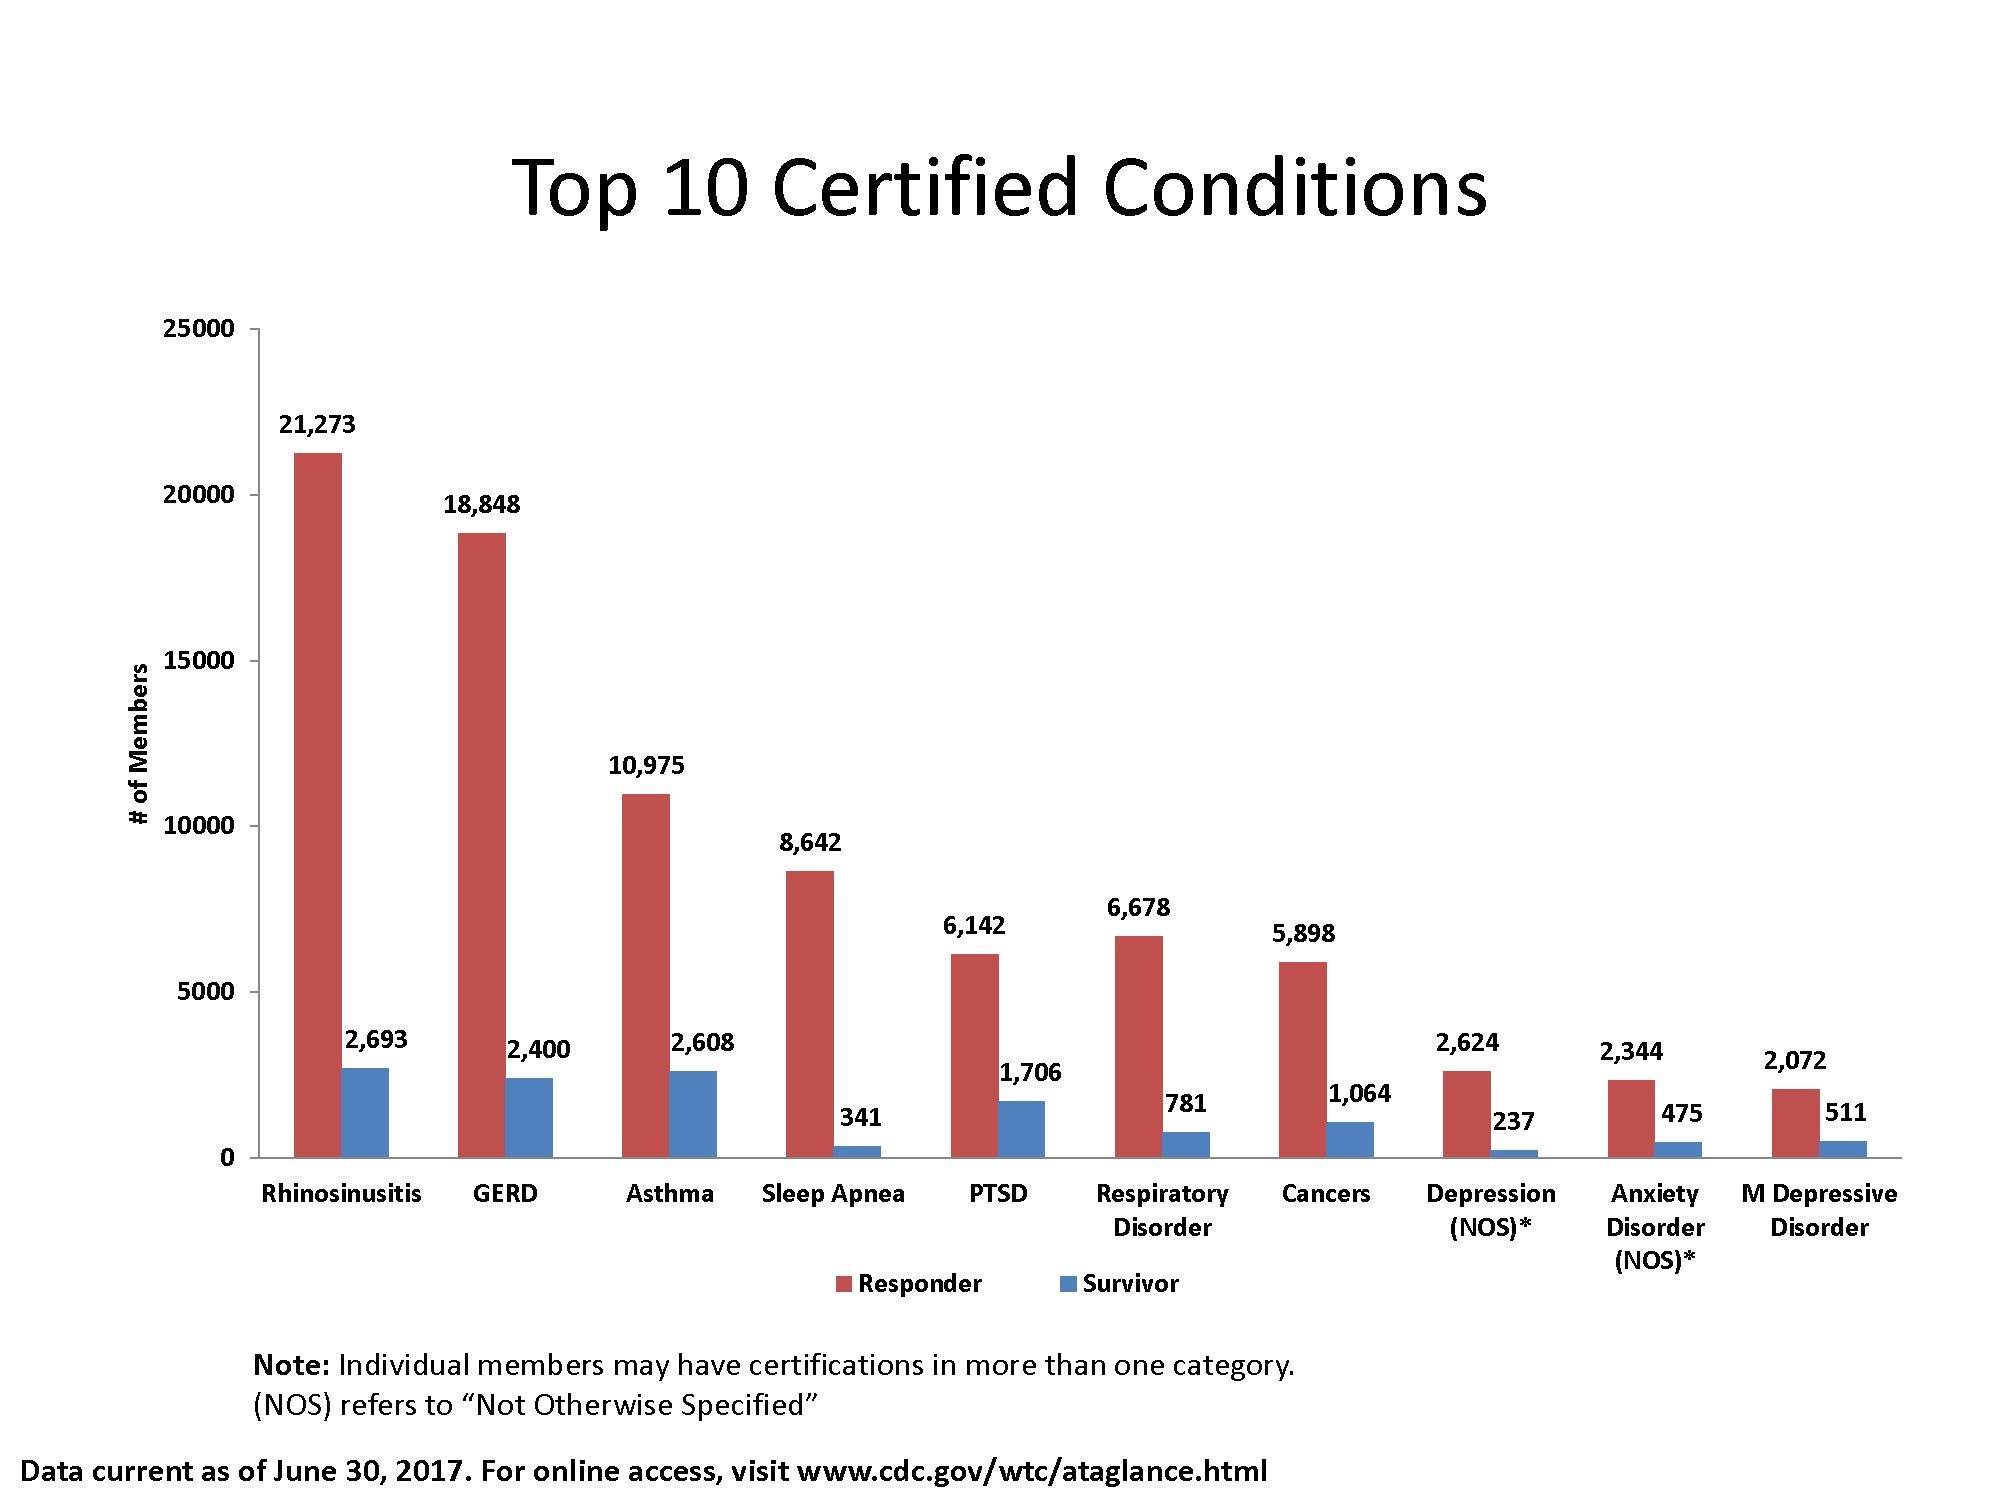 Bar chart showing the top 10 certified conditions:

21,273 Responders and 2,693 Survivors are certified for rhinosinusitis
18,848 Responders and 2,400 Survivors are certified for GERD
10,975 Responders and 2,608 Survivors are certified for asthma
8,642 Responders and 341 Survivors are certified for sleep apnea
6,142 Responders and 1,706 Survivors are certified for PTSD
6,678 Responders and 781 Survivors are certified for respiratory disorder
5,898 Responders and 1,064 Survivors are certified for cancers
2,624 Responders and 237 Survivors are certified for depression
2,344 Responders and 475 Survivors are certified for WTC-exacerbated COPD
2,072 Responders and 511 Survivors are certified by anxiety disorder